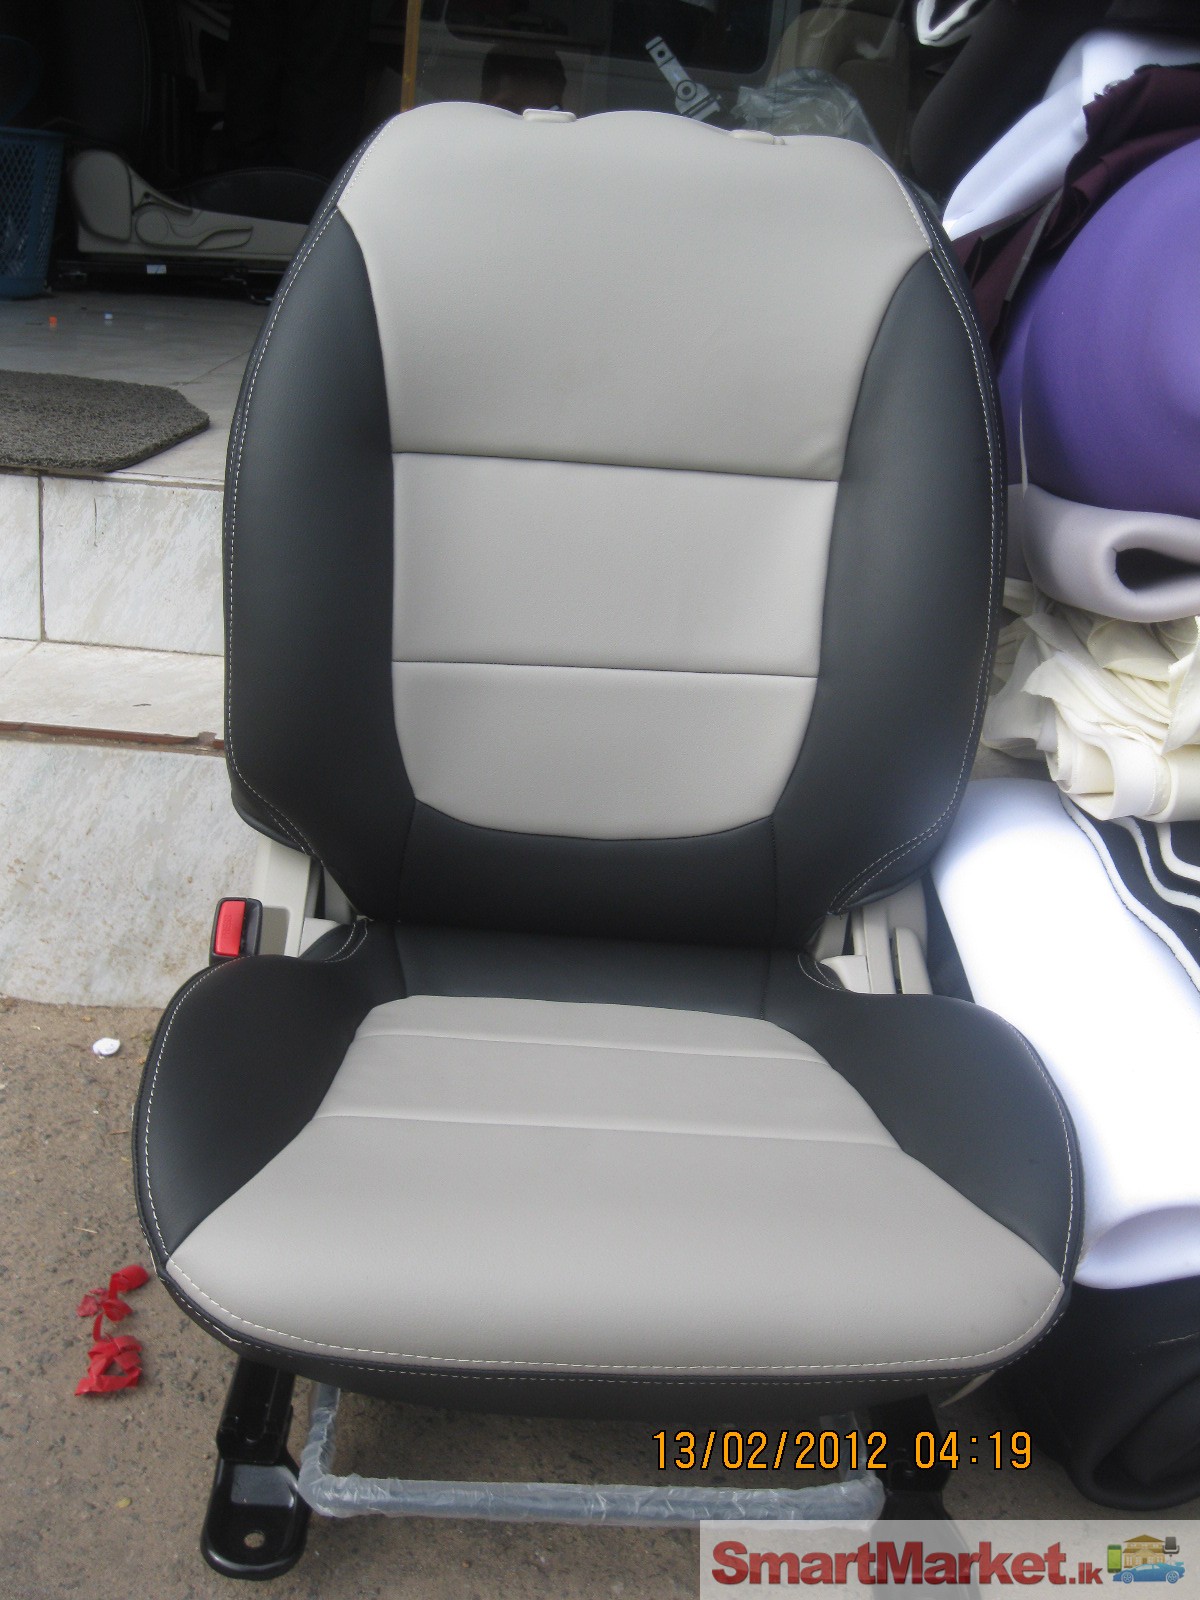 Japanese seat covers for sale